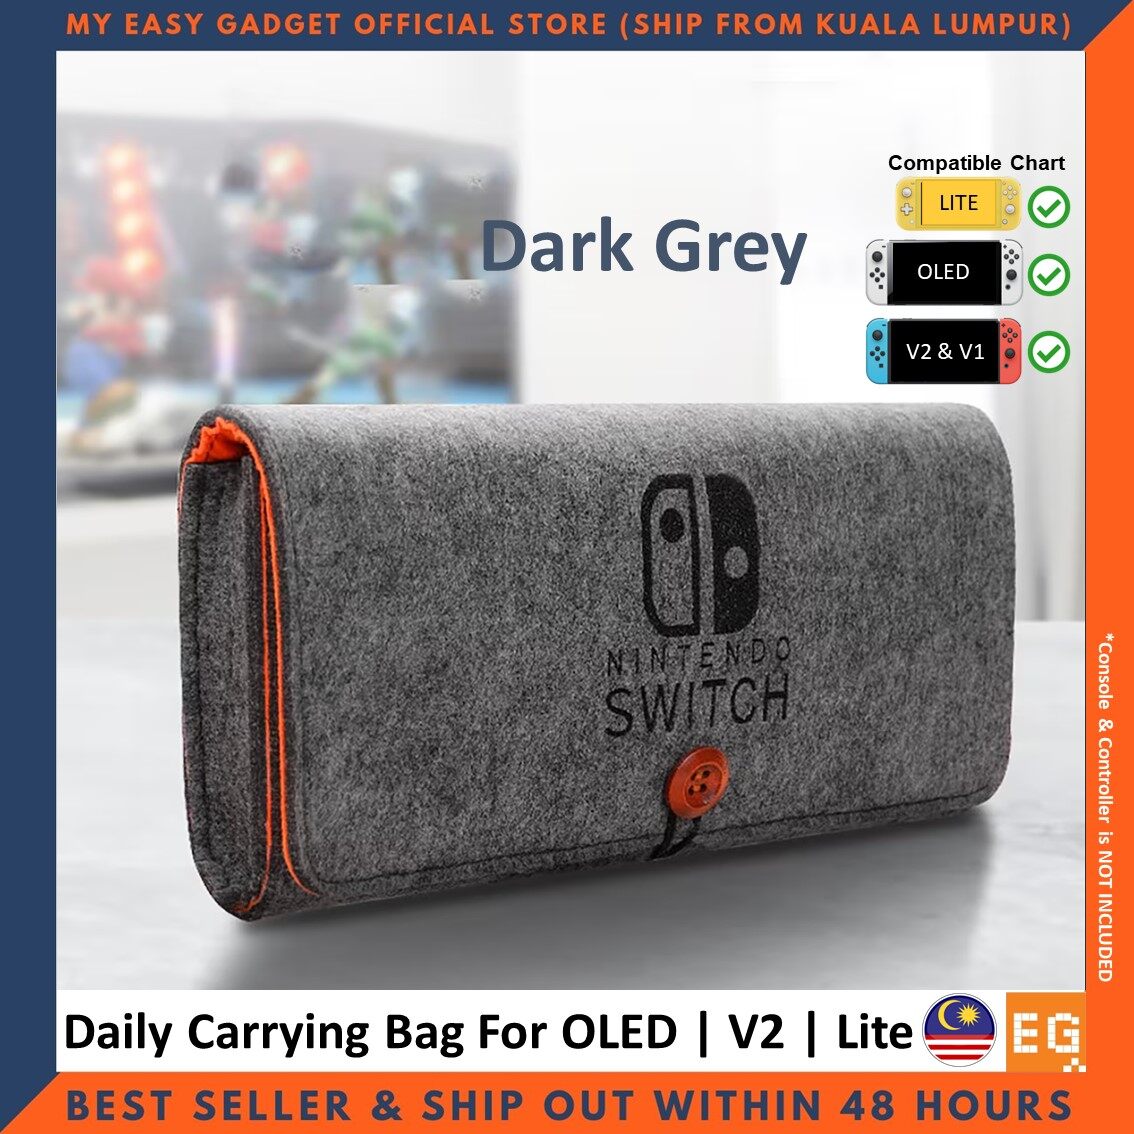 Nintendo Switch OLED Case / Switch V2 / Switch Lite Case Pika Durable Carrying Case Travel Bag with Game Card Slot